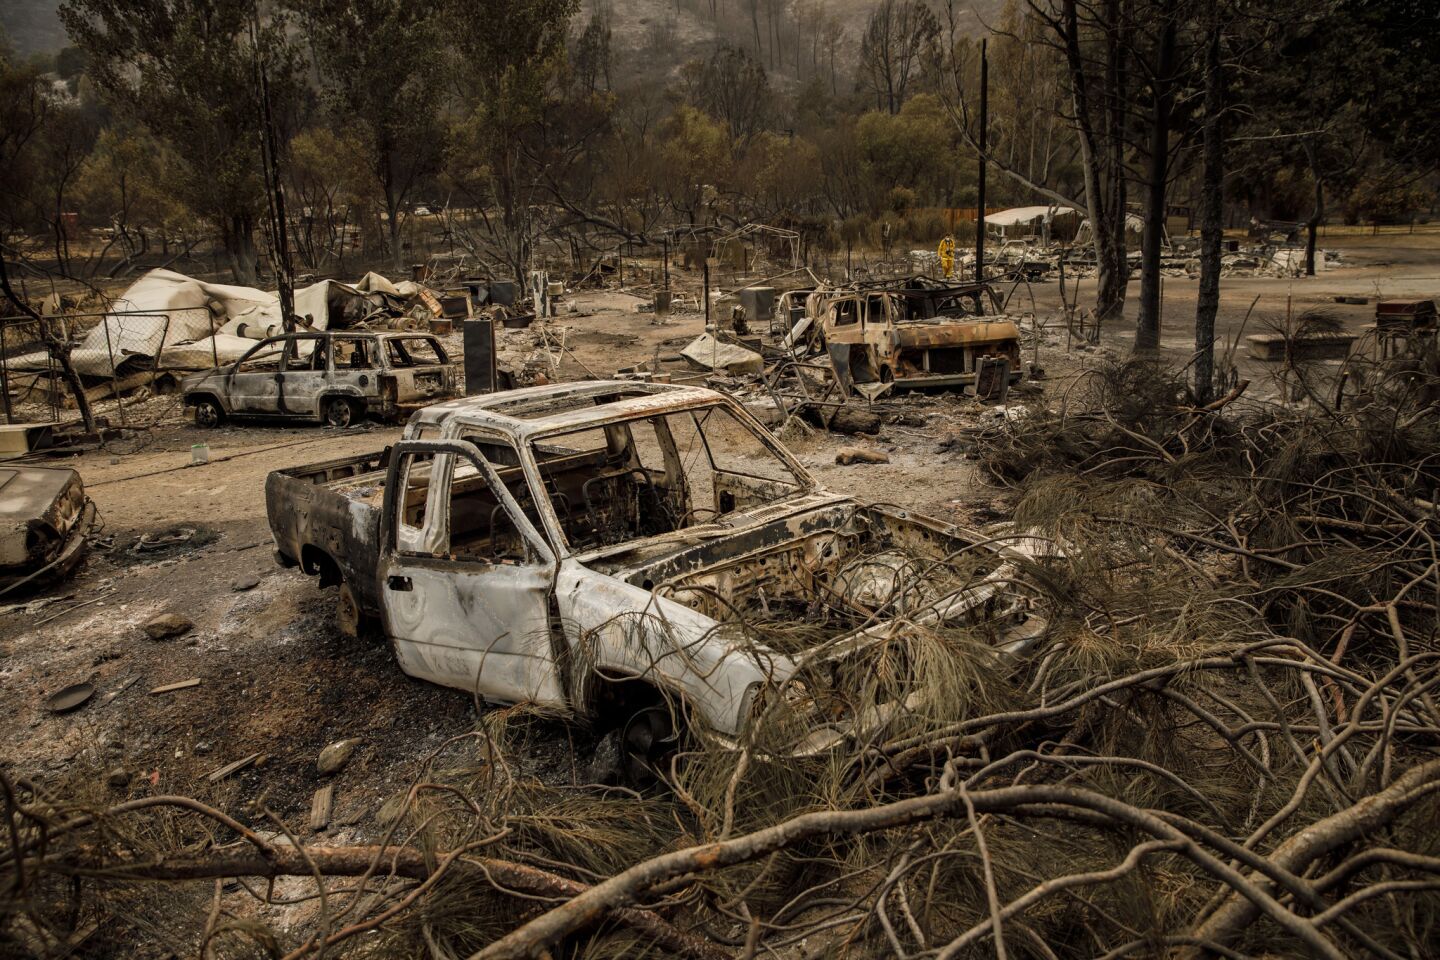 Burned out cars sit in the remains of a home that was destroyed by the Medocino Complex fire in Clearlake Oaks, Calif.